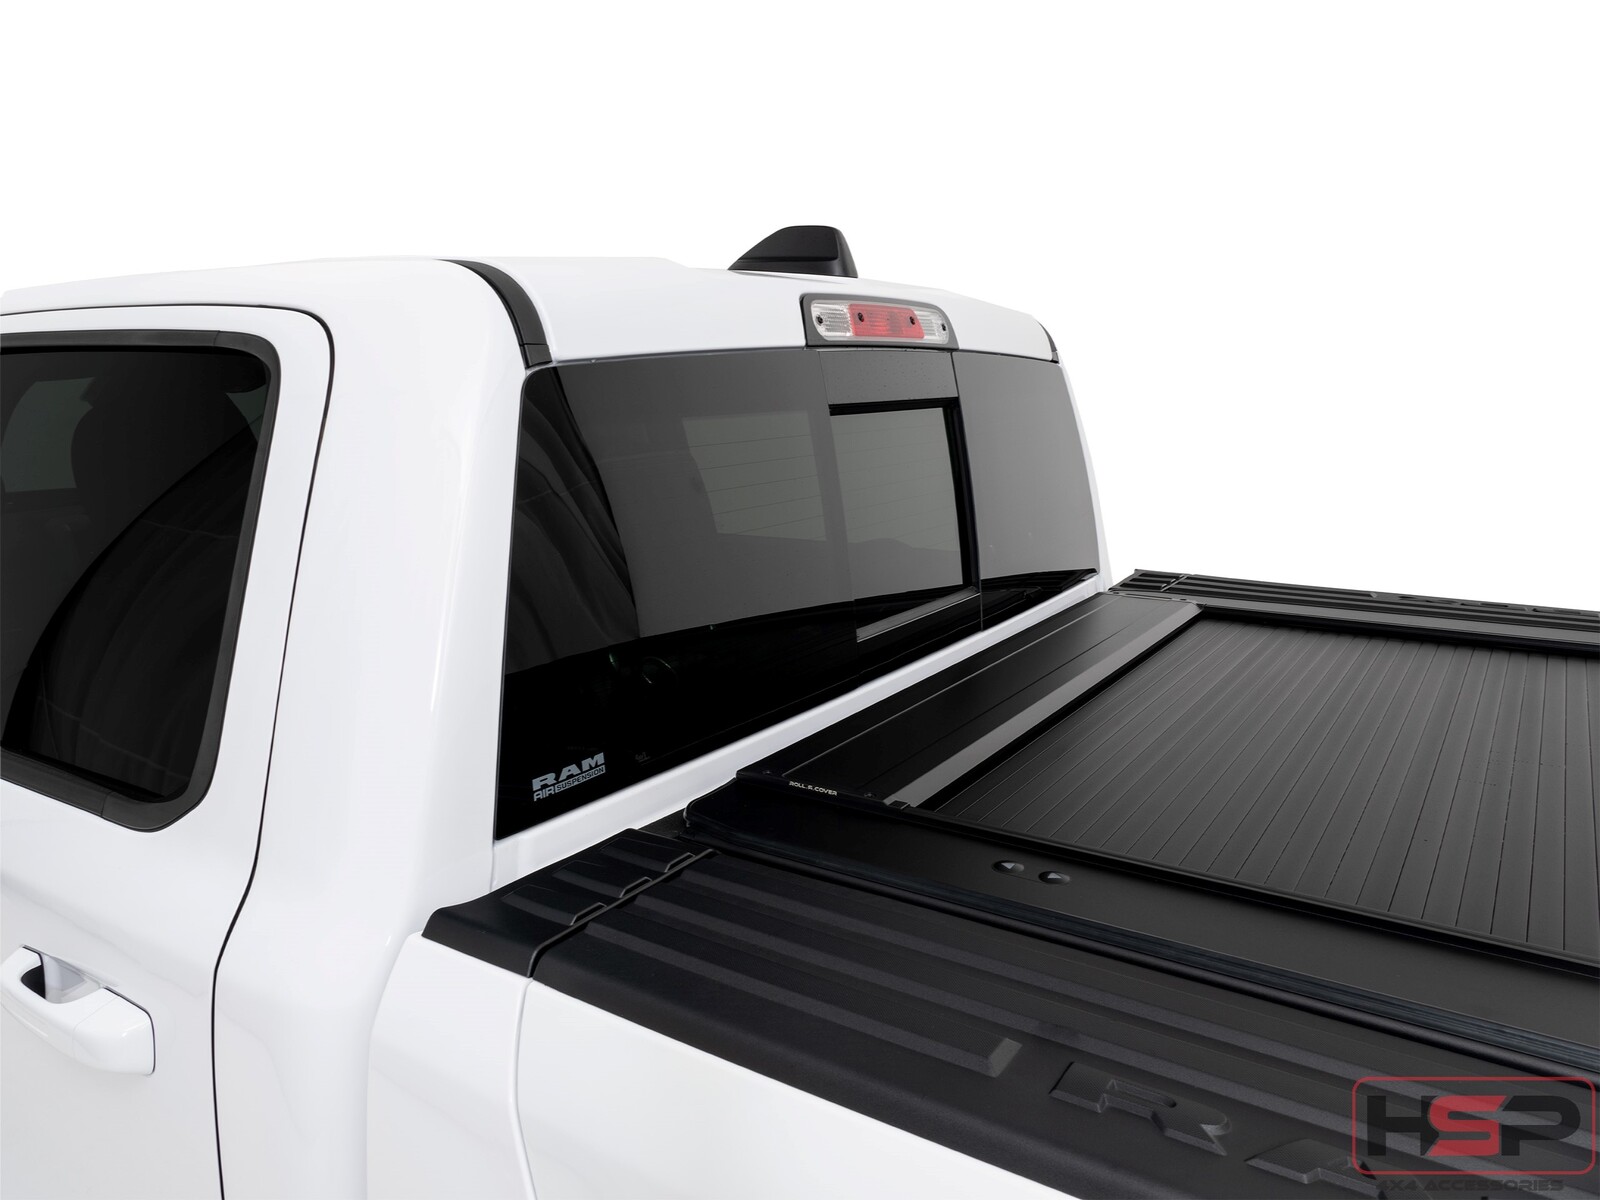 HSP Roll R Cover Series 3 To Suit Ram 1500 DT 2020+ Rambox 5'7" Tub